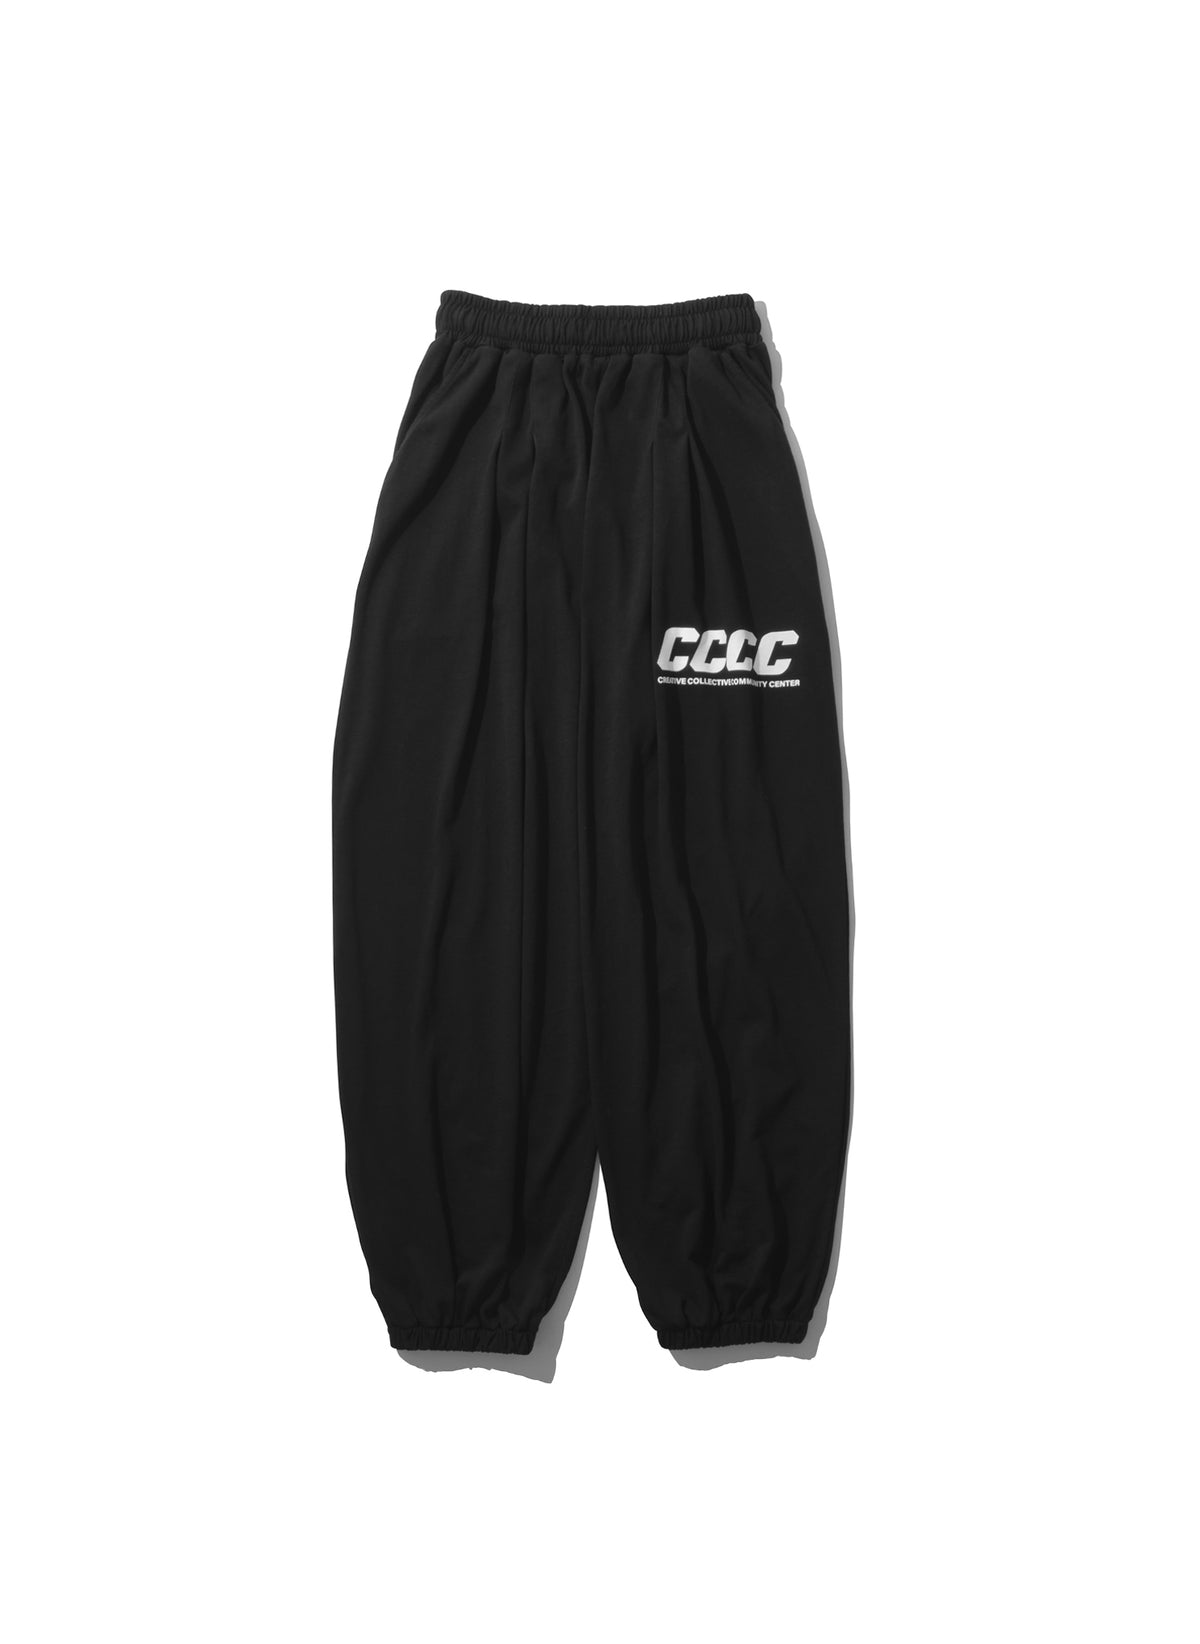 <span style="color: #f50b0b;">Last One</span> WILLY CHAVARRIA / CCCC GODZILLA PANTS WILLY BLACK